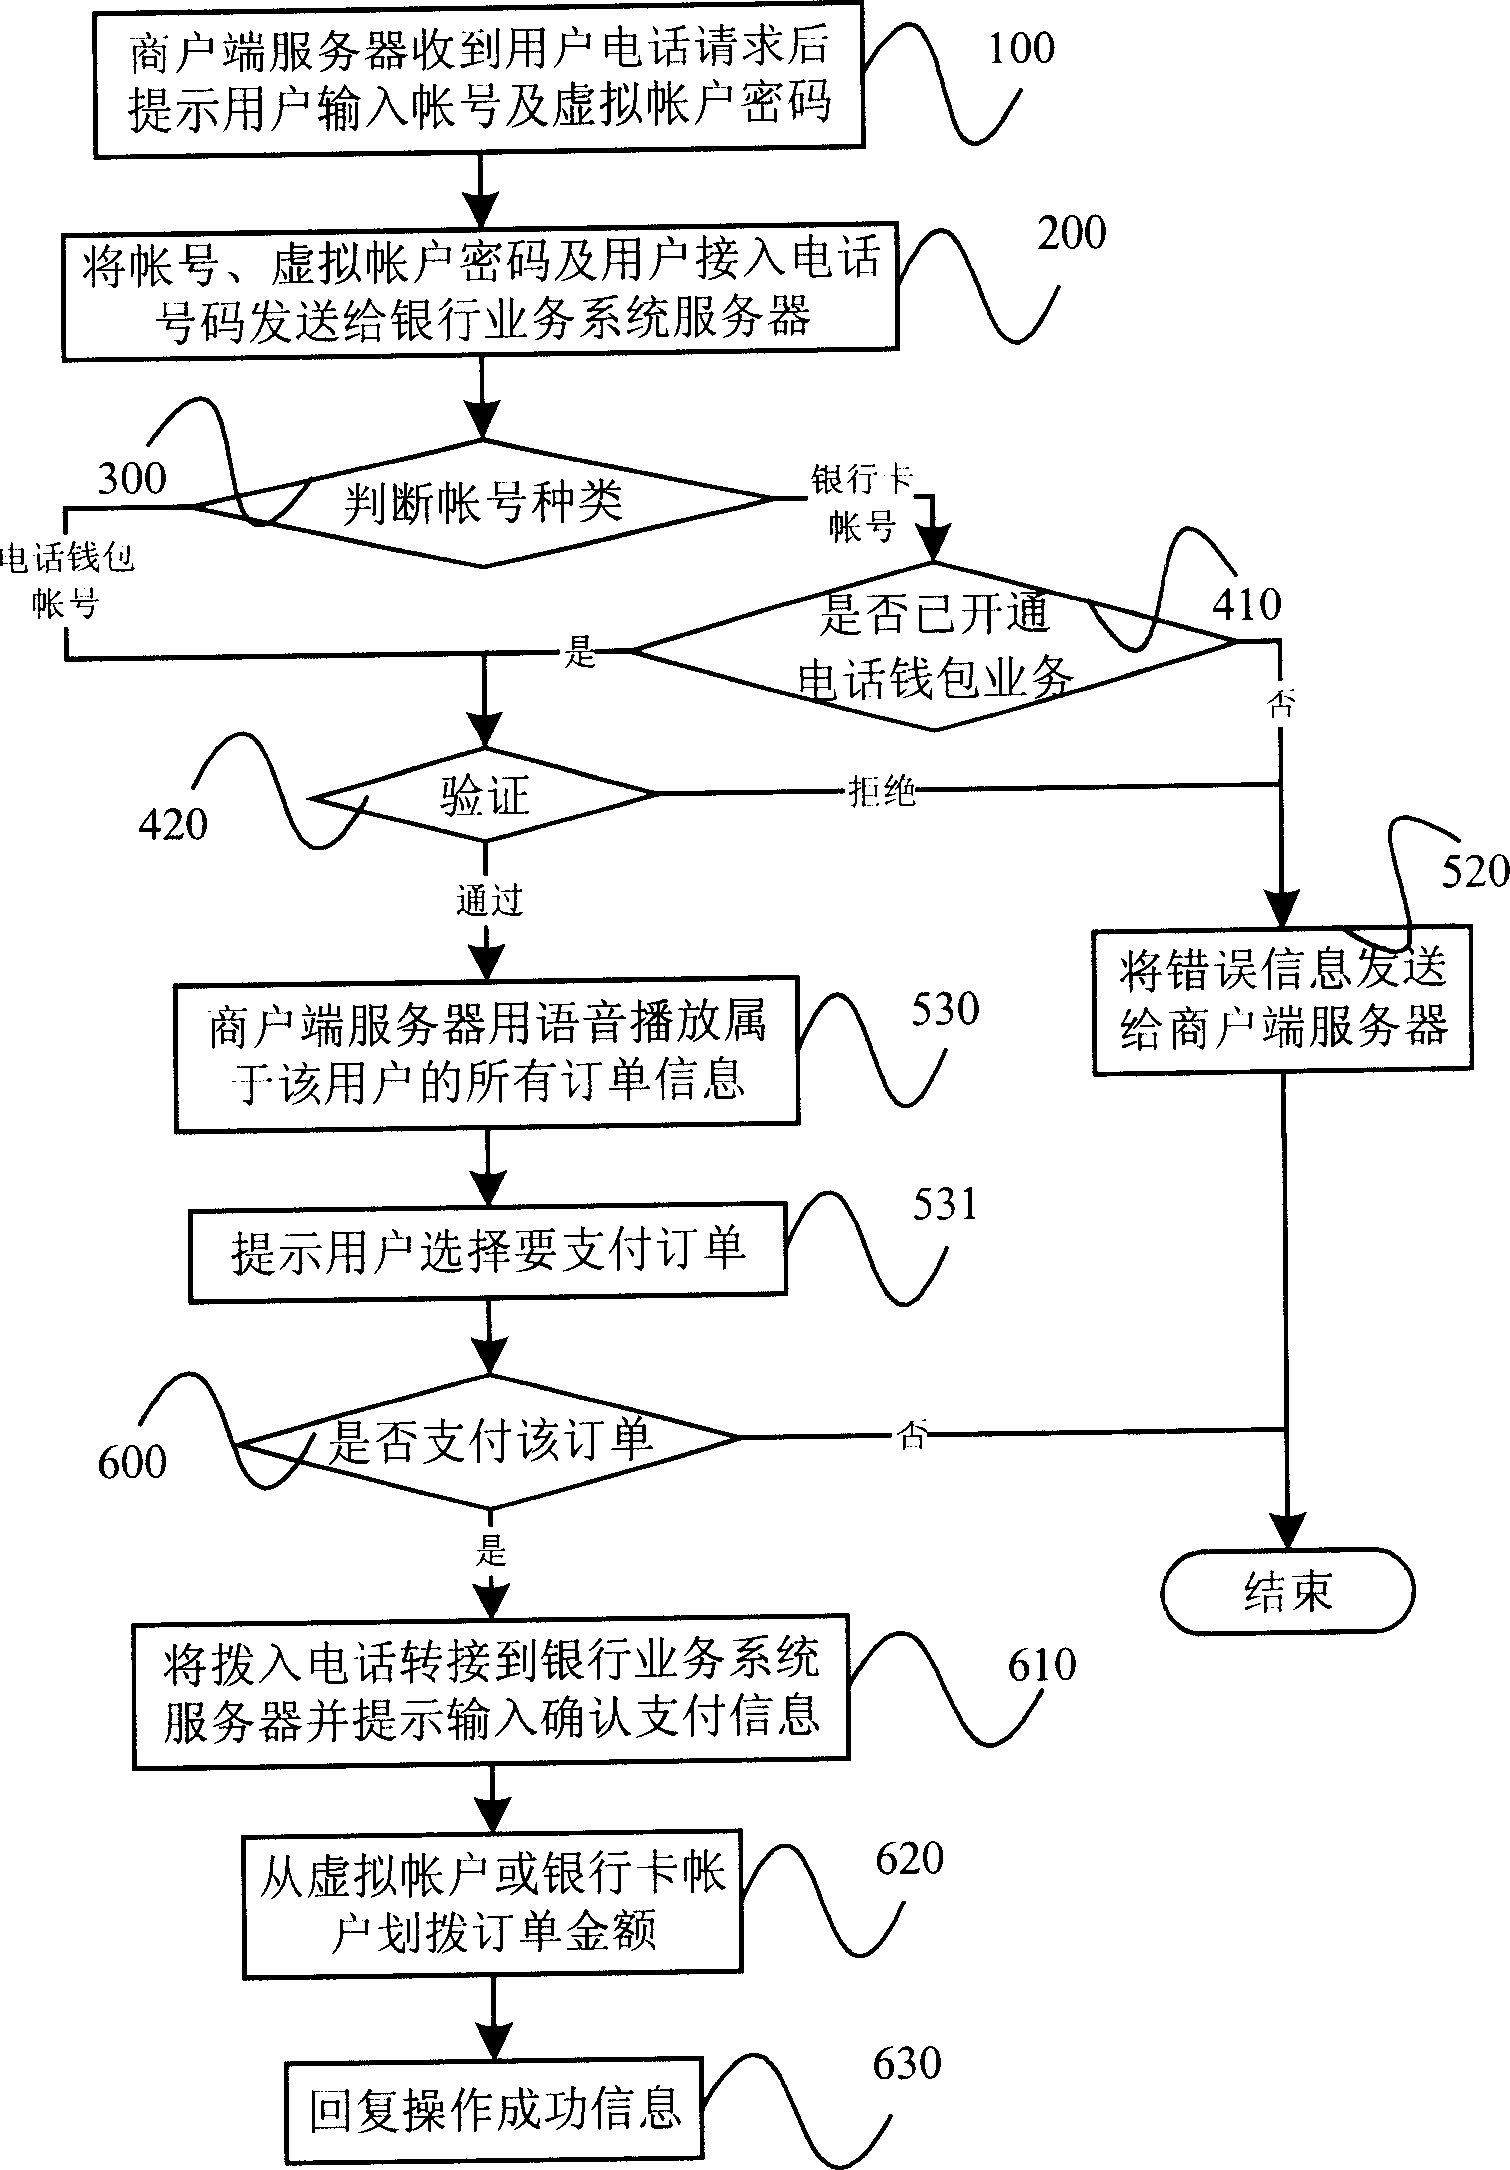 Method for processing payment information